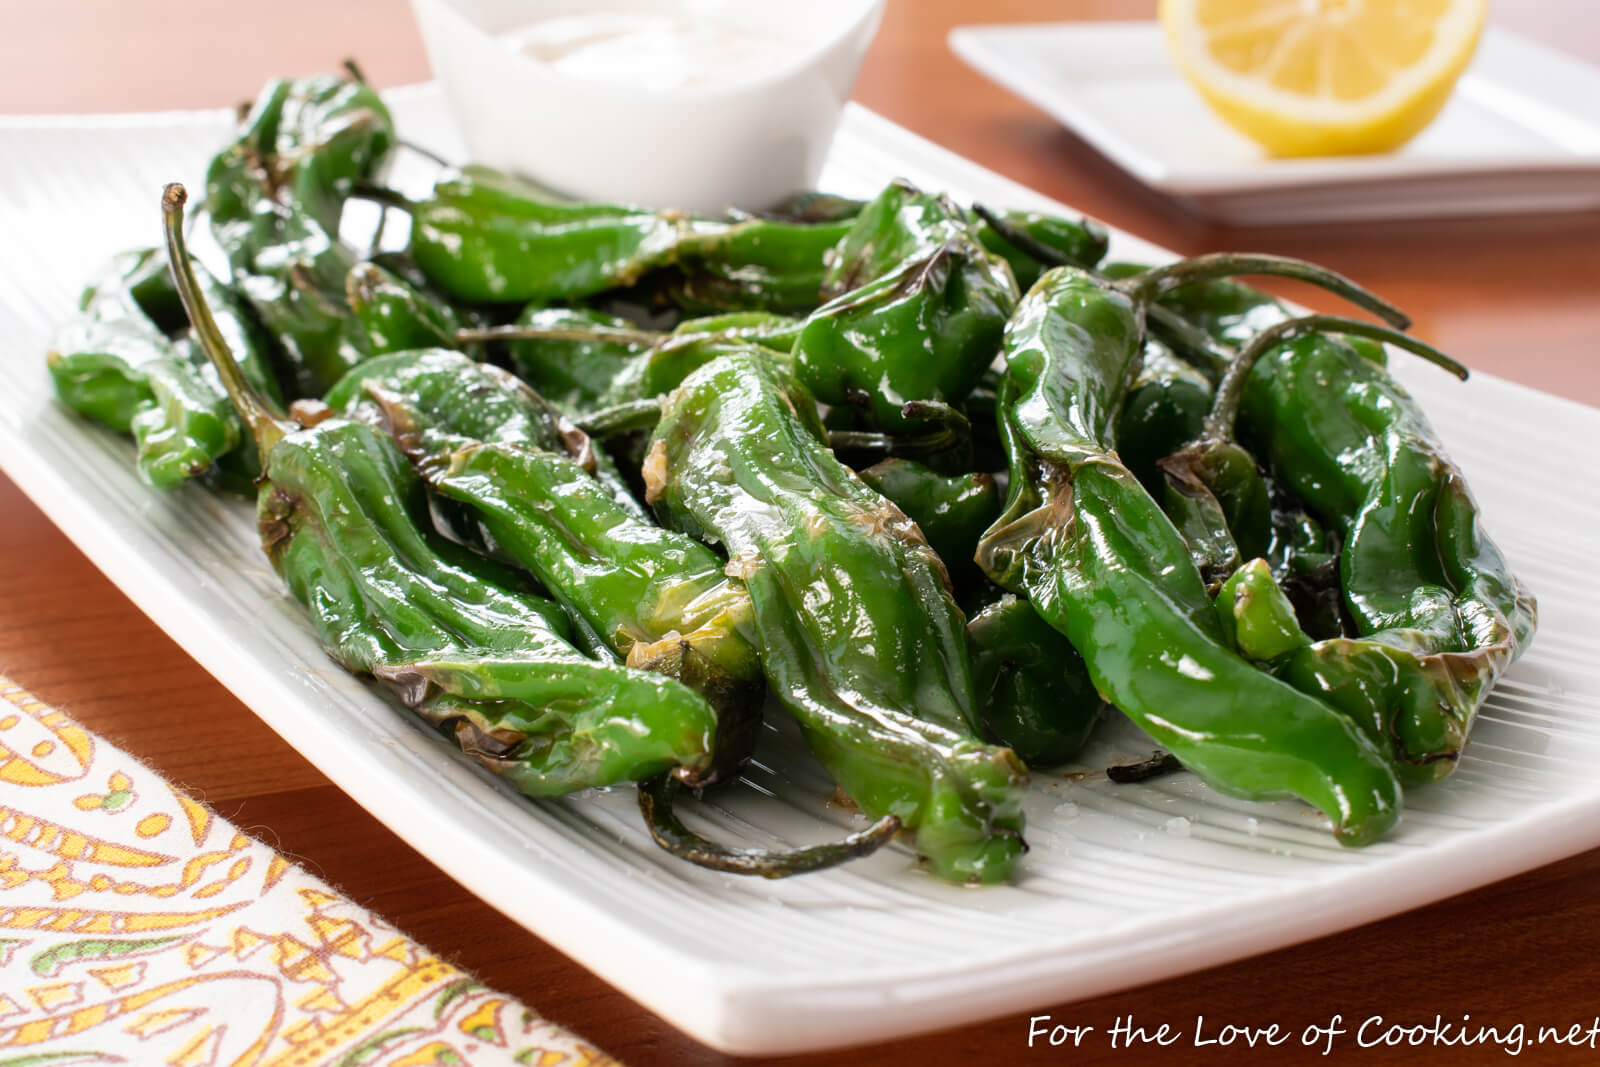 Blistered Shishito Peppers with Lemon and Garlic